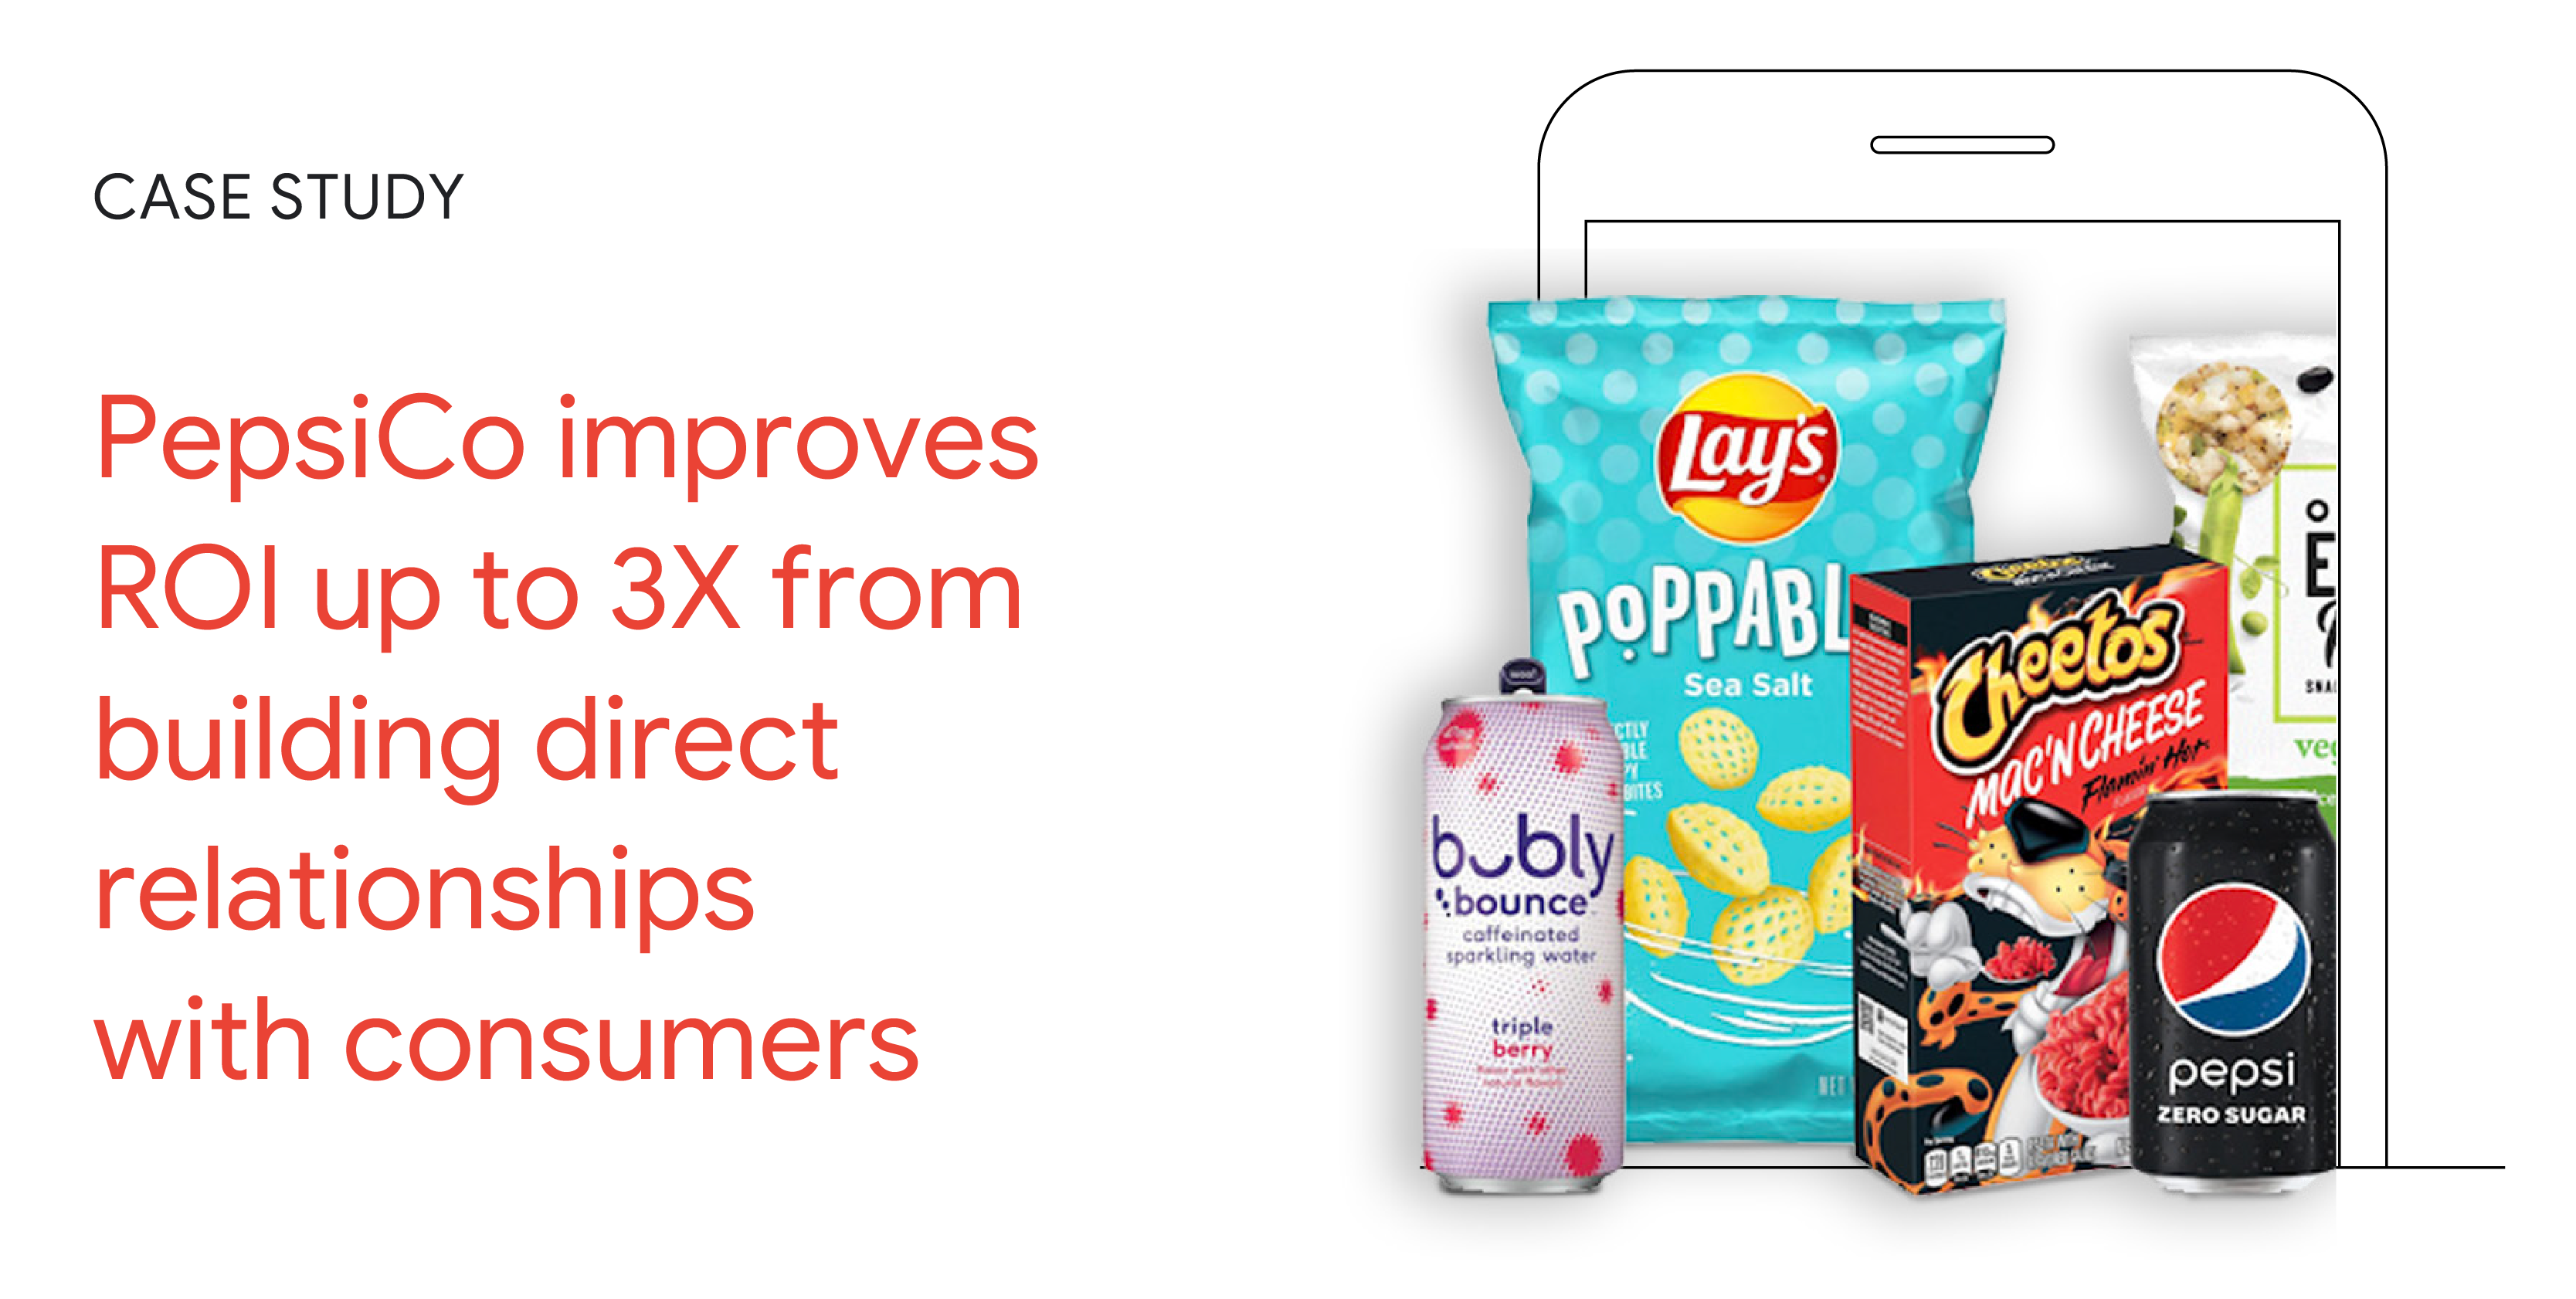 Case Study: PepsiCo improves ROI up to 3X from building direct relationships with consumers. An array of PepsiCo products, like sodas and chips, spill out of a tablet device.